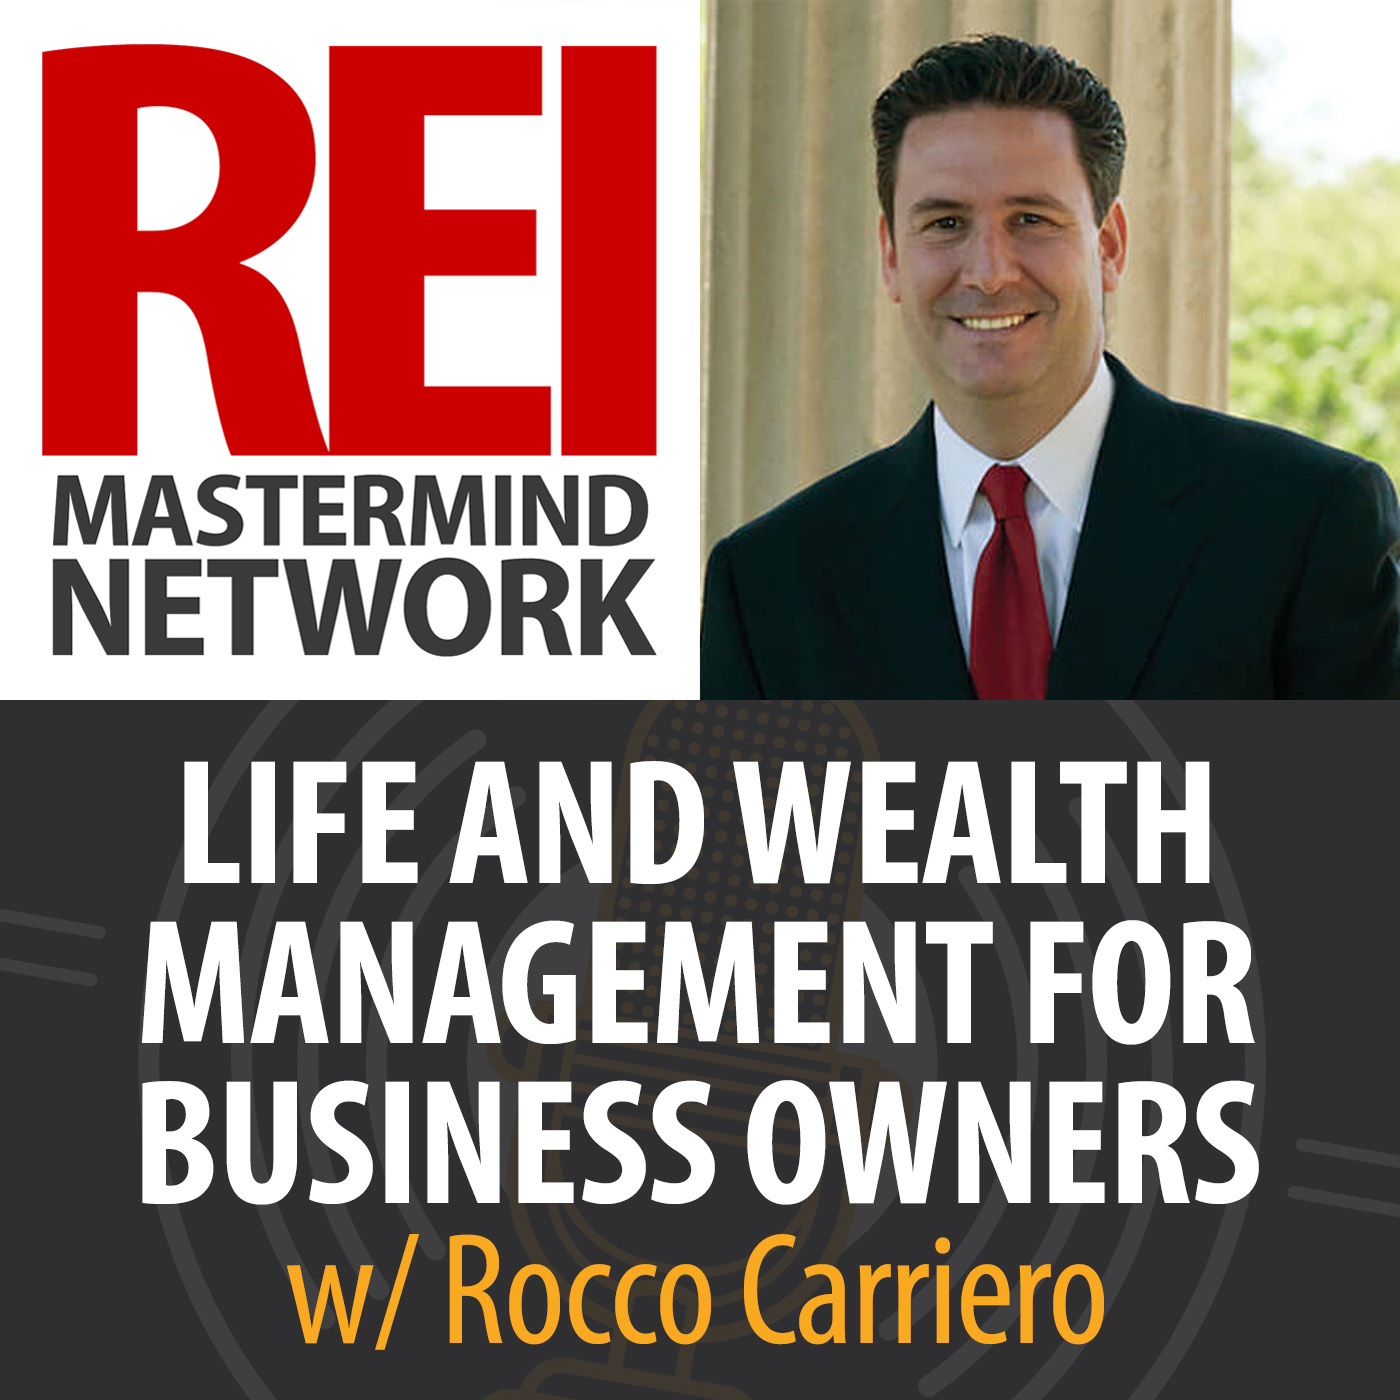 Life and Wealth Management for Business Owners with Rocco Carriero Image